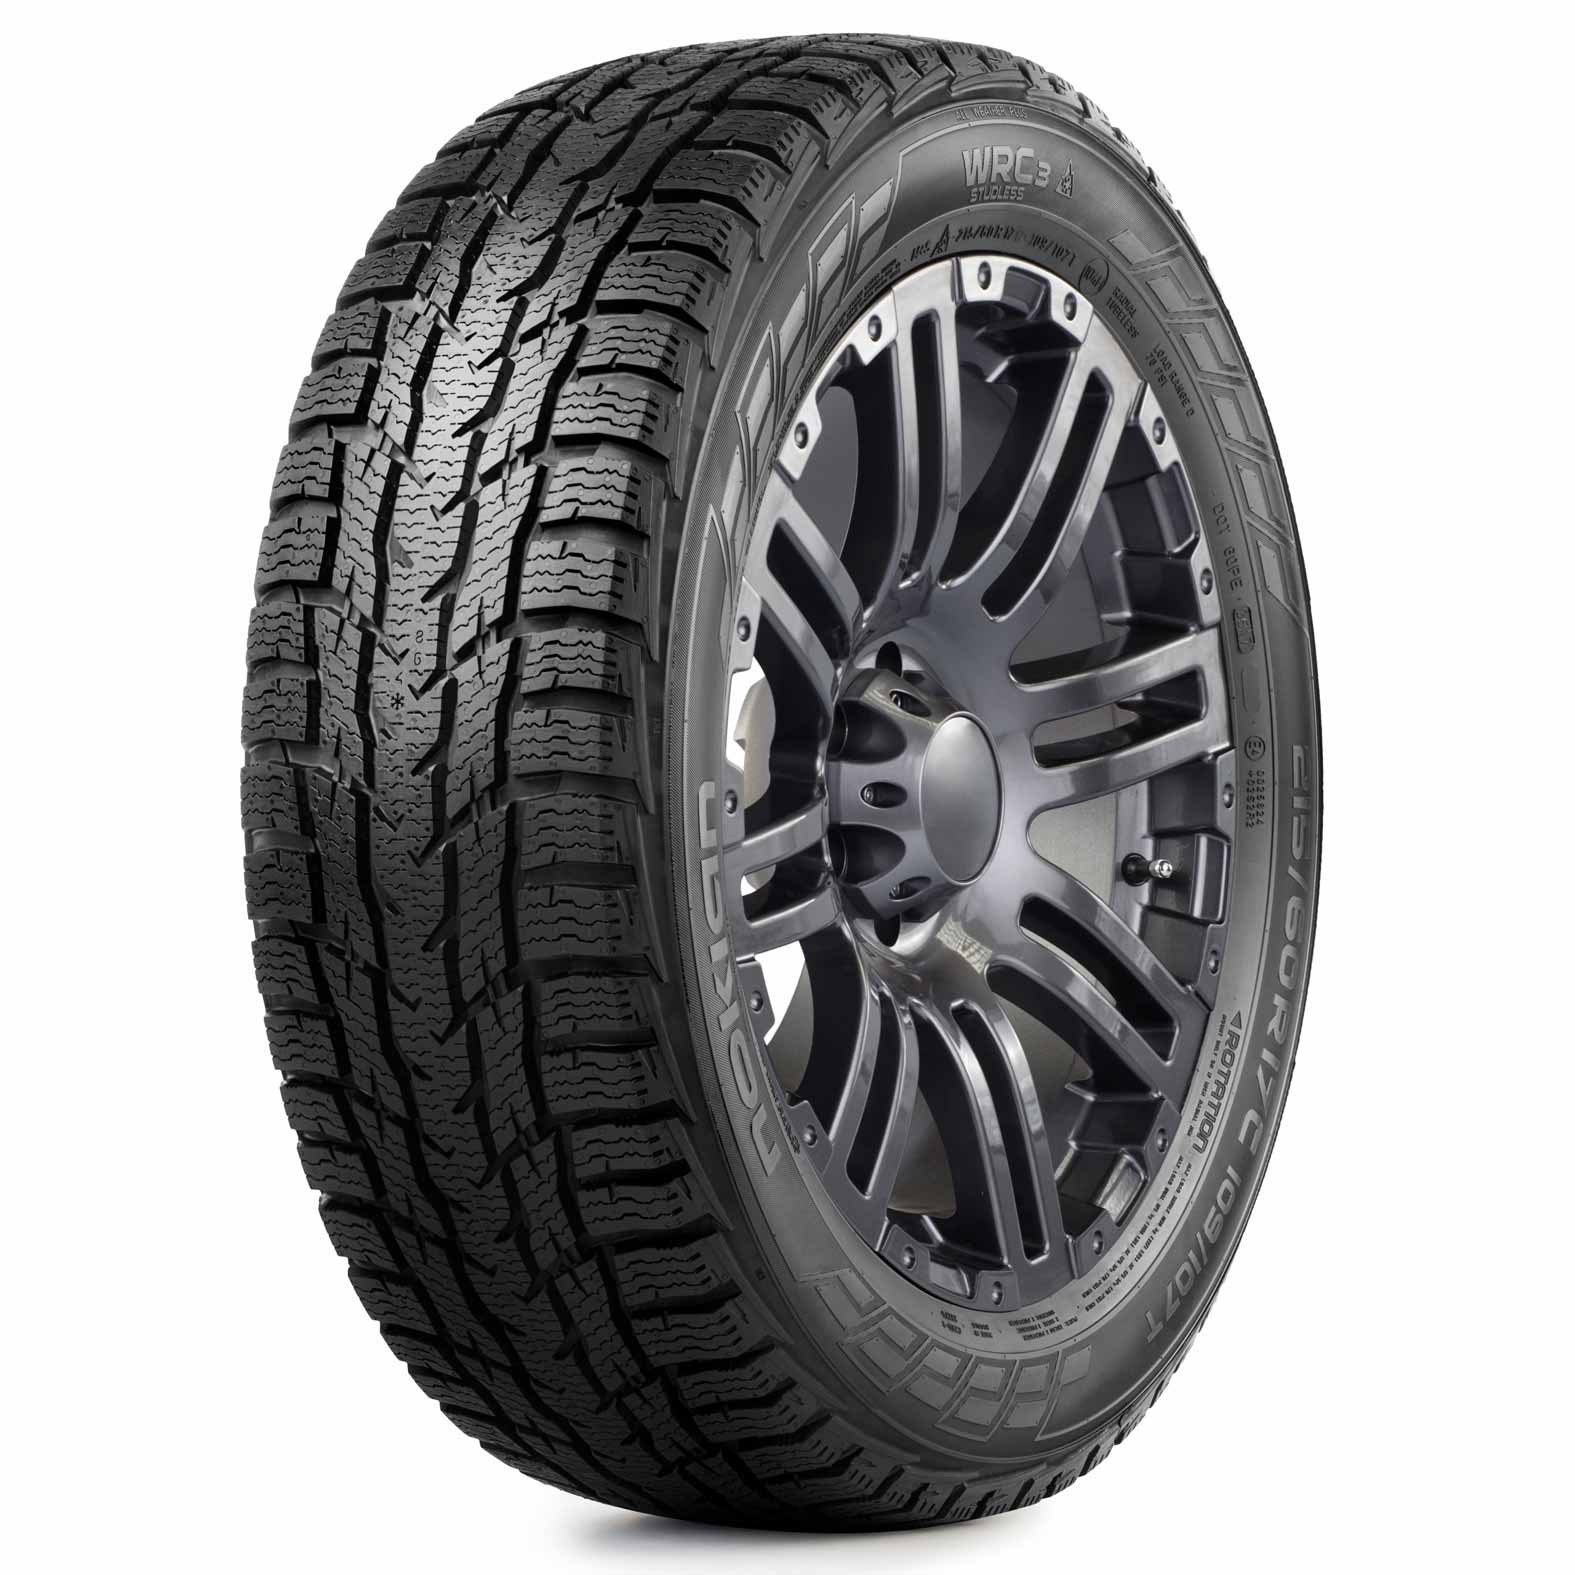 | All-Weather WR Nokian Tire Tires Kal for C3